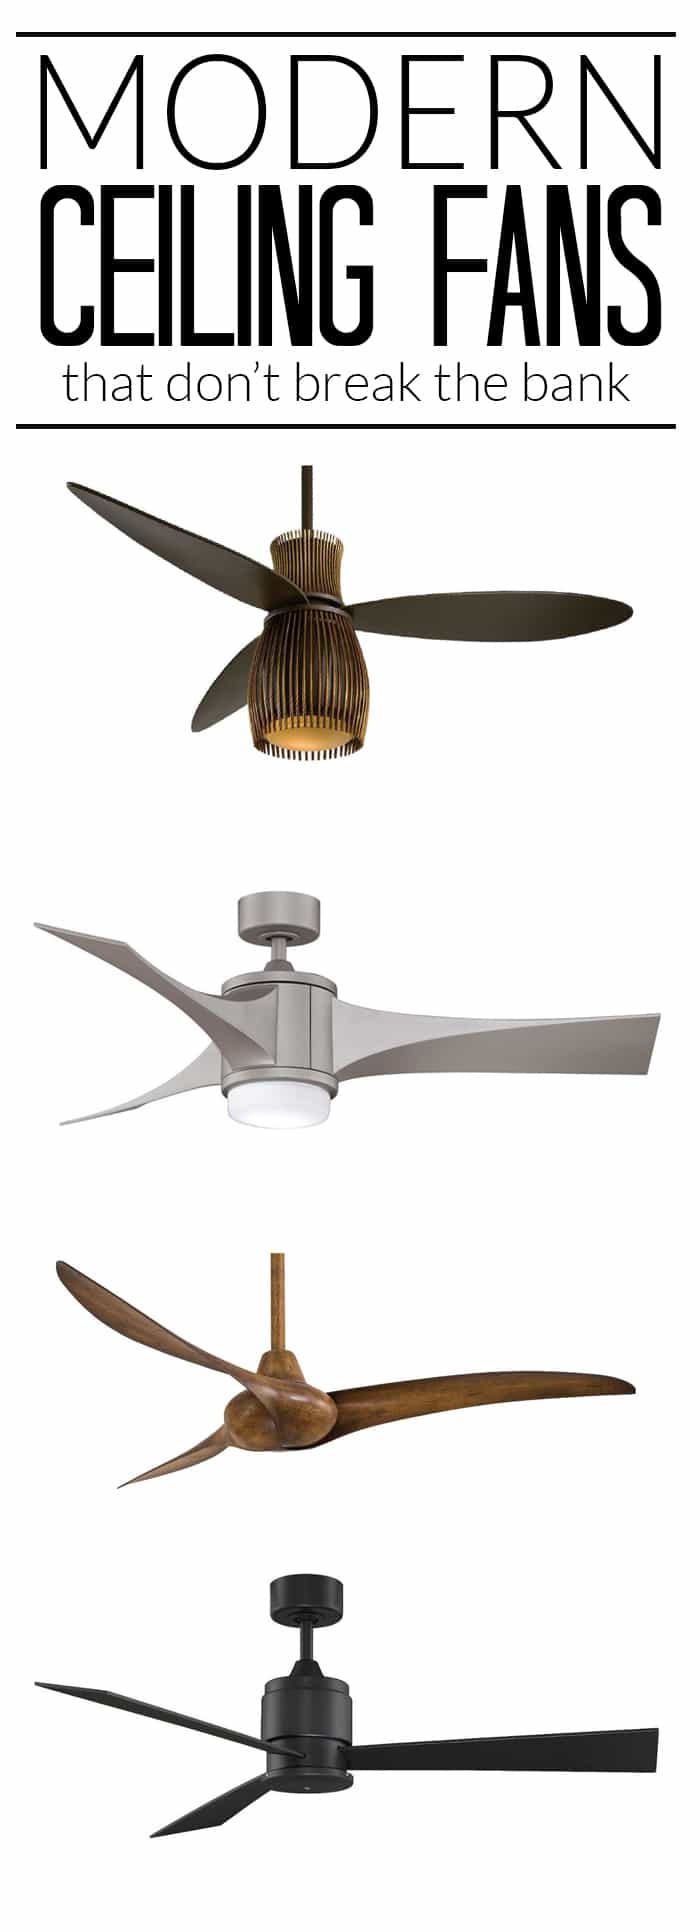 Love these modern ceiling fans! They could work in so many spaces - from glam to industrial to eclectic and even modern farmhouse!